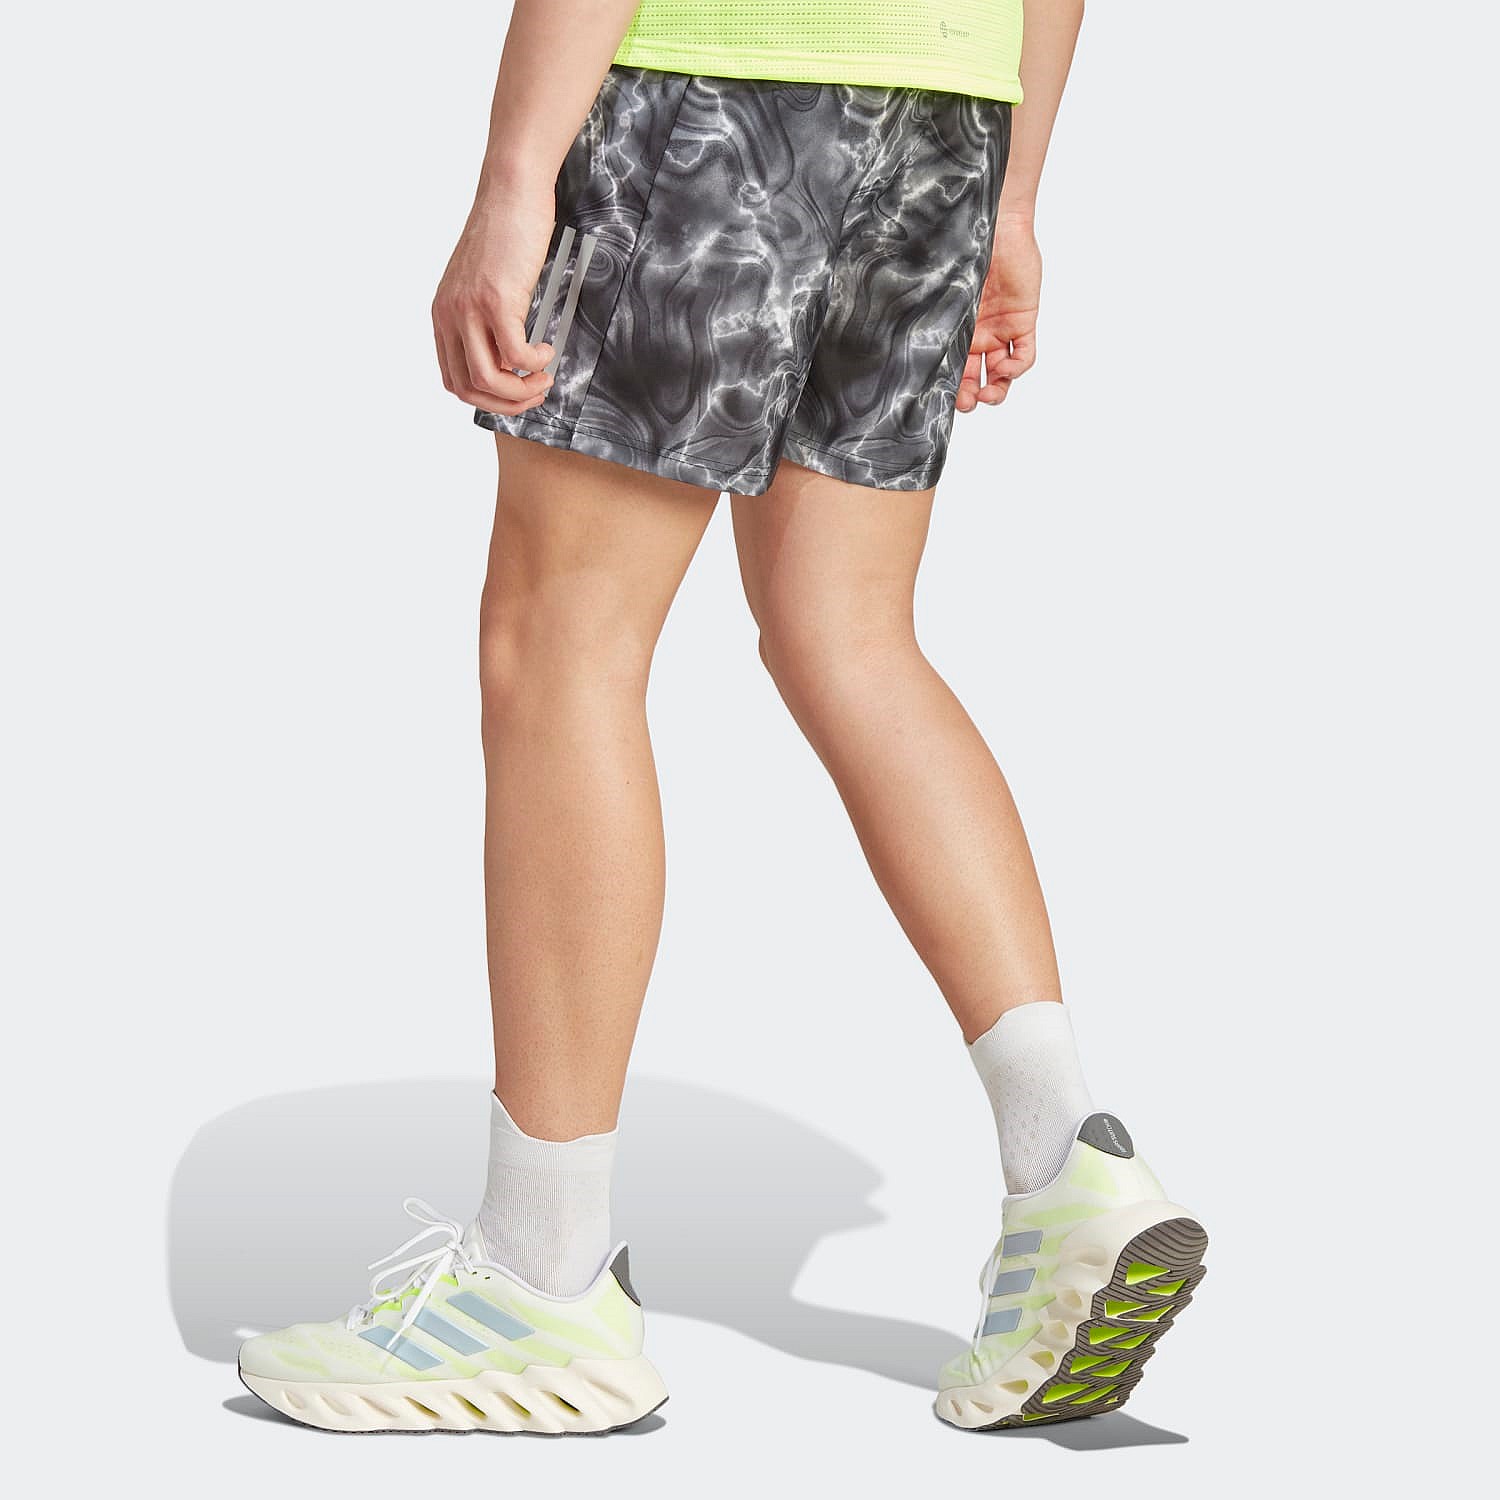 Adidas Own The Run Allover Print Shorts | Shorts | Stirling Sports